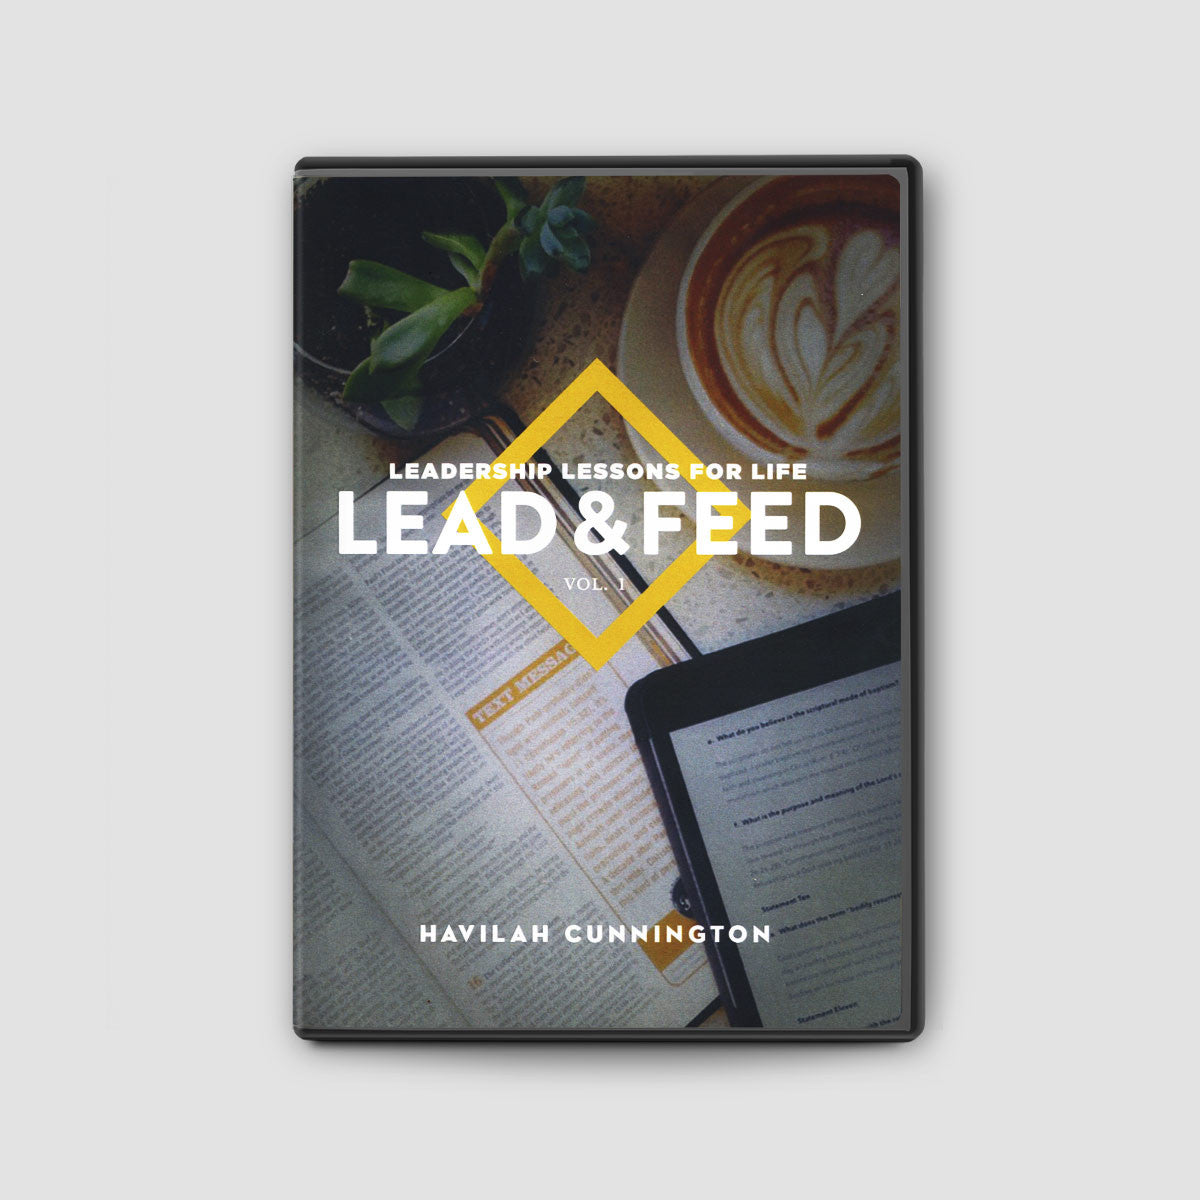 Leadership Lessons for Life: Lead and Feed